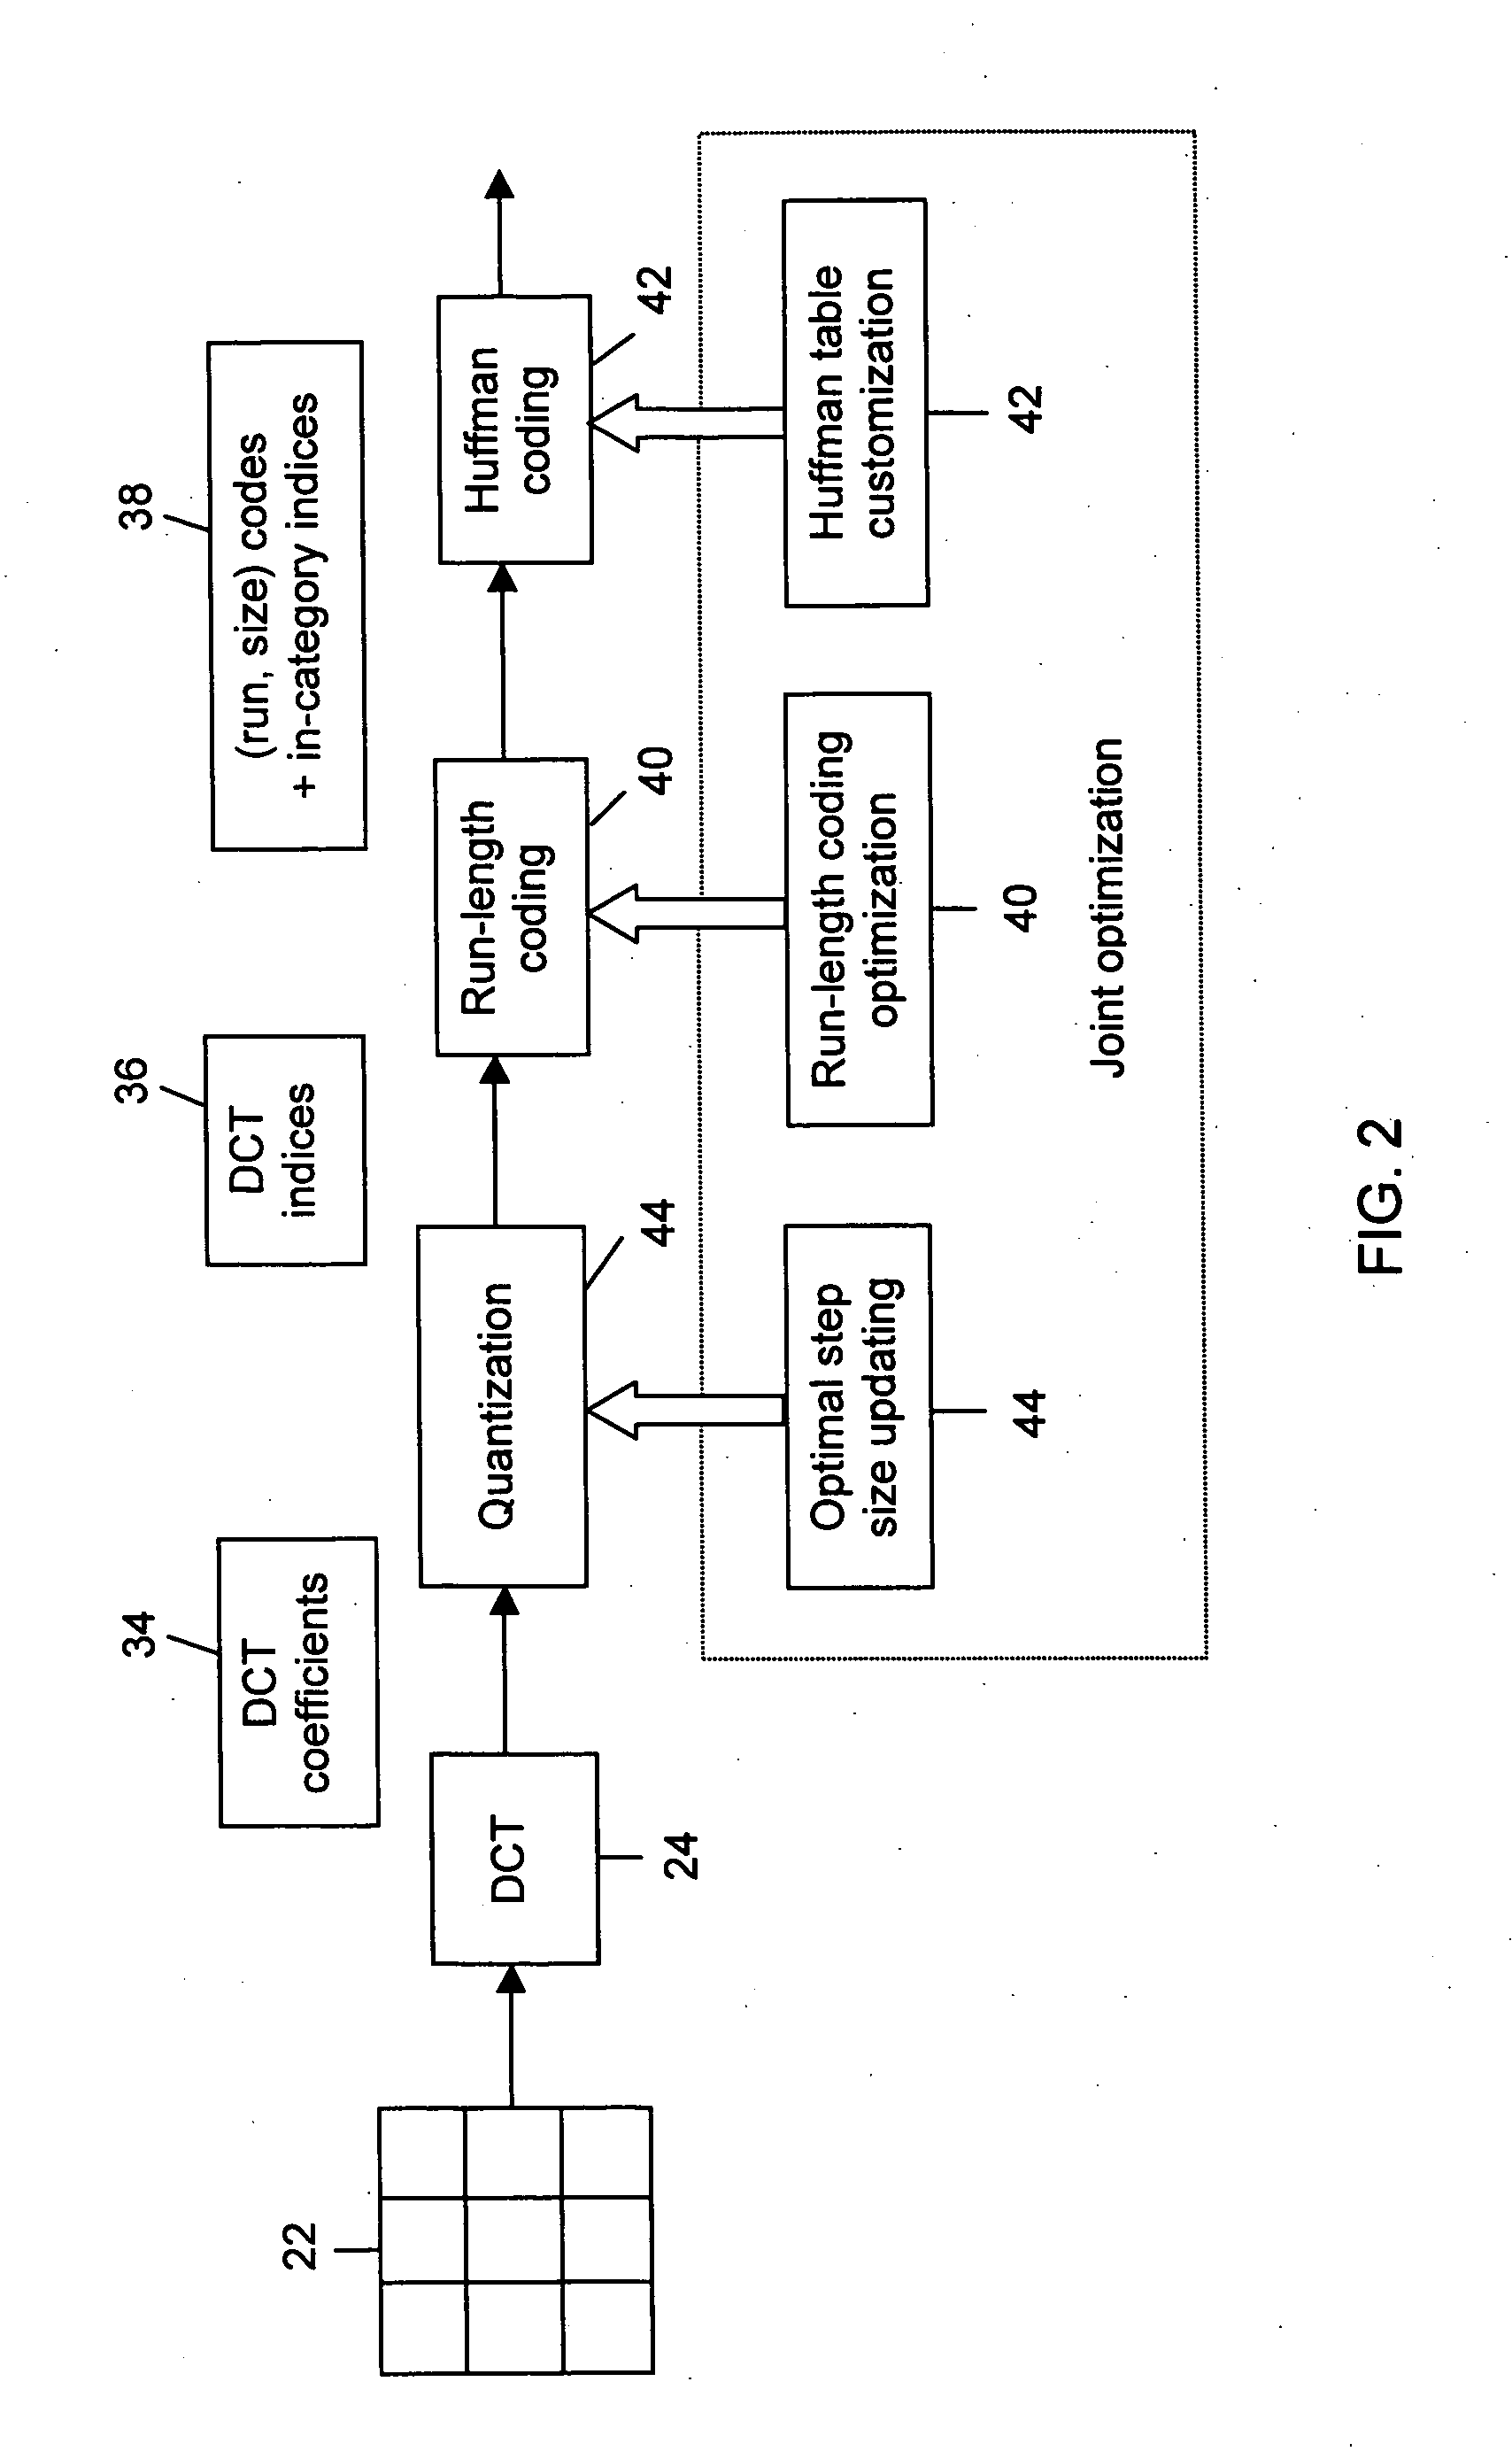 Method, system and computer program product for optimization of data compression